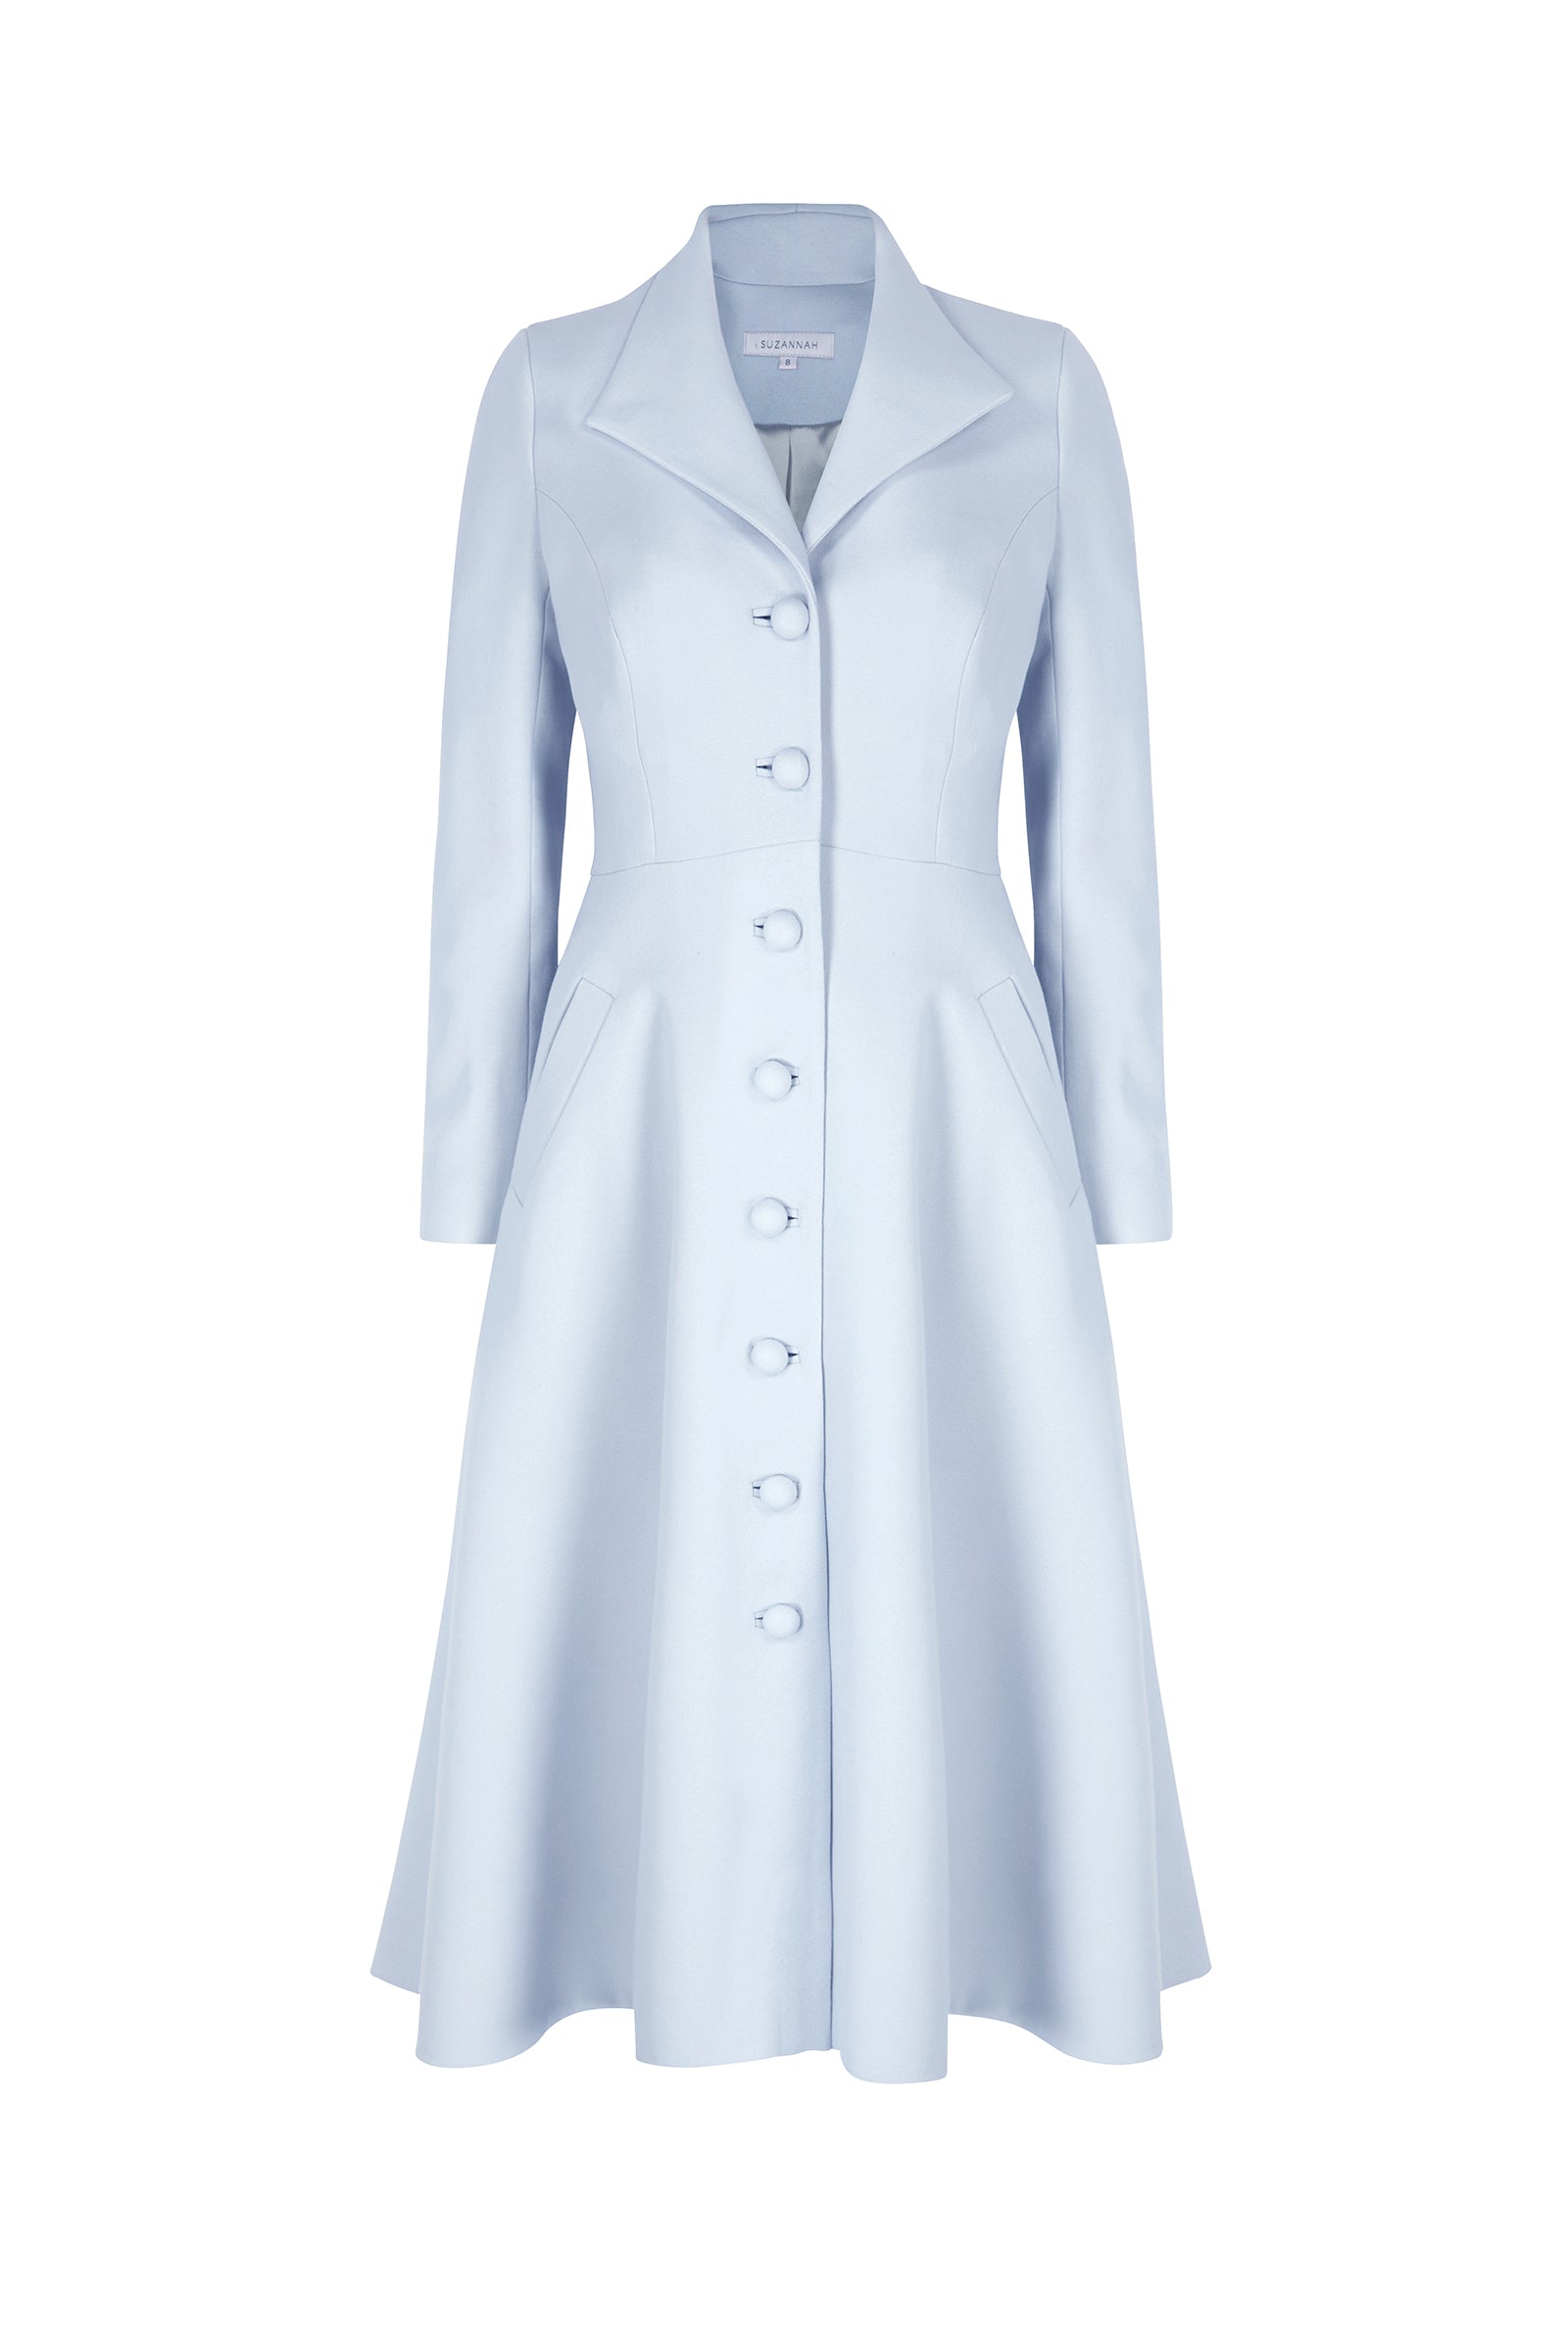 Slenderella Veronica House Coat with long sleeves | James Meade